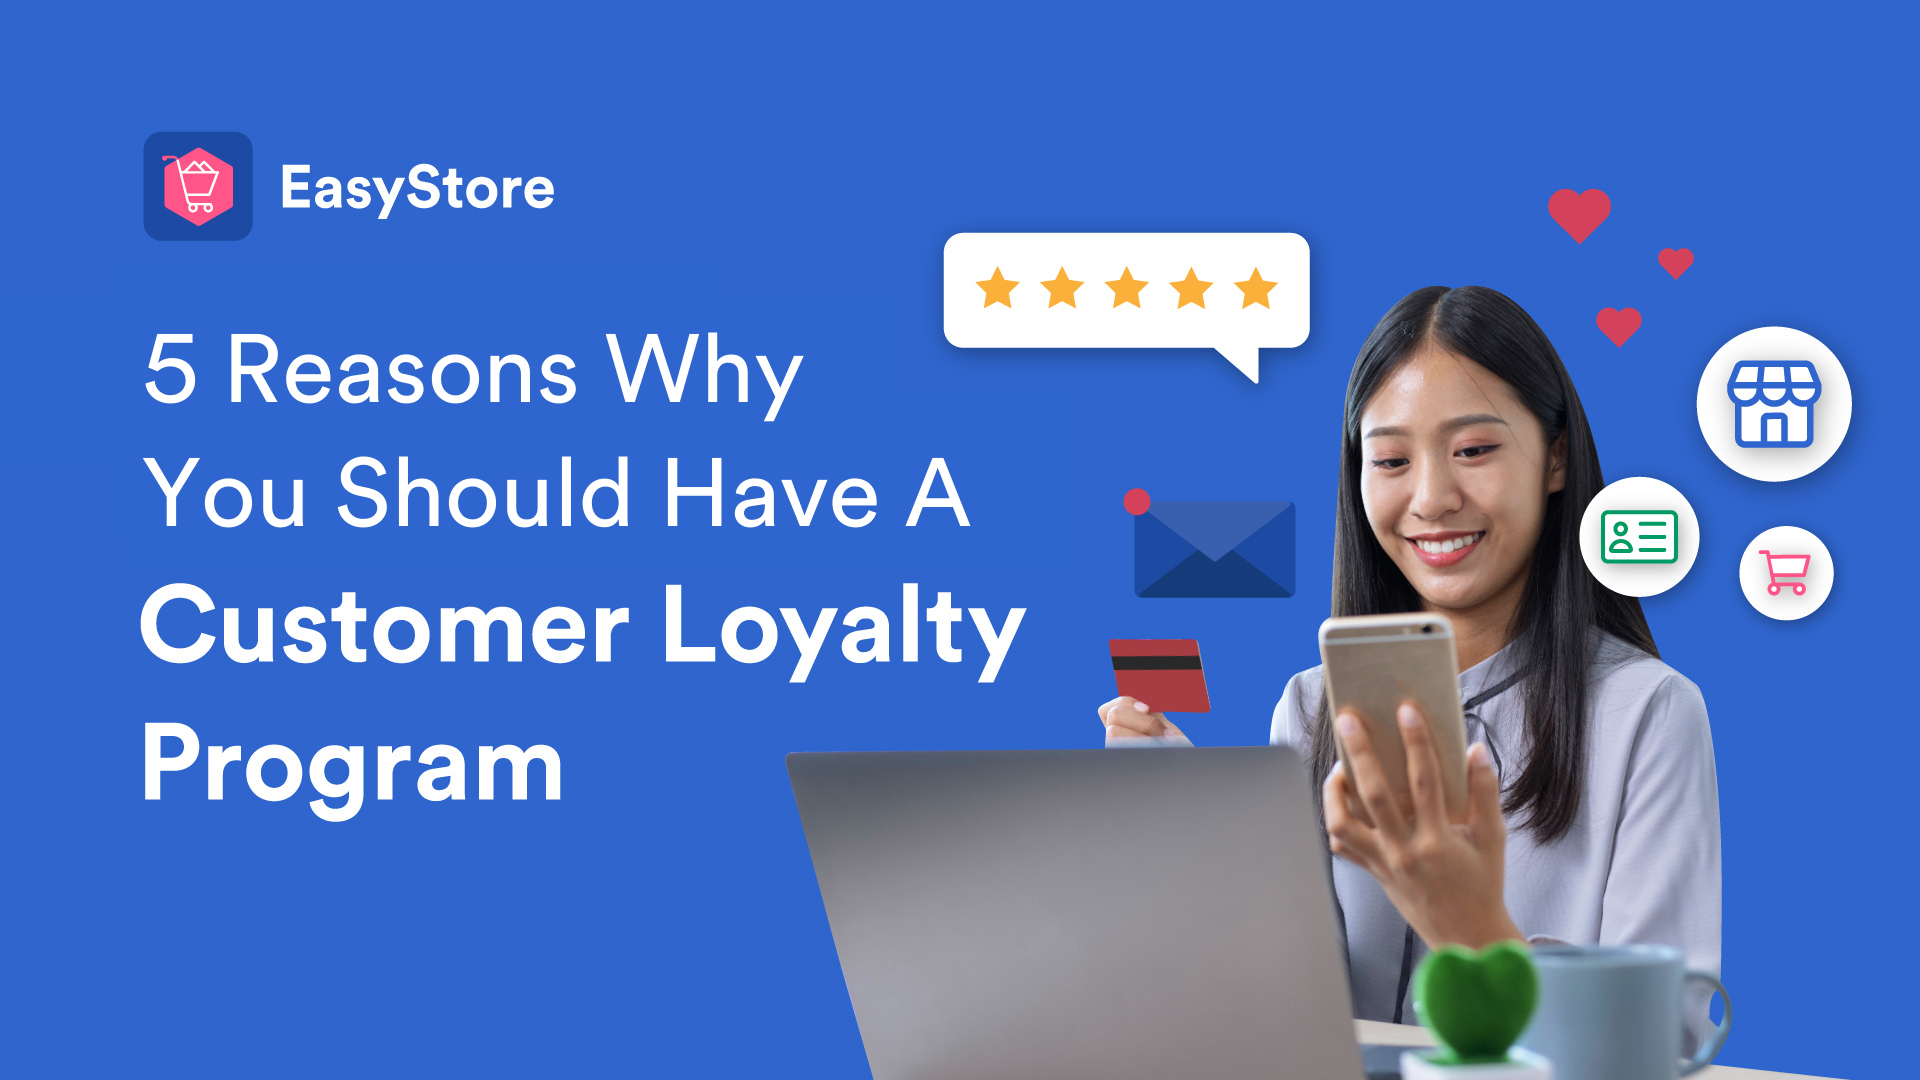 5 Reasons Why You Should Have a Customer Loyalty Program | EasyStore